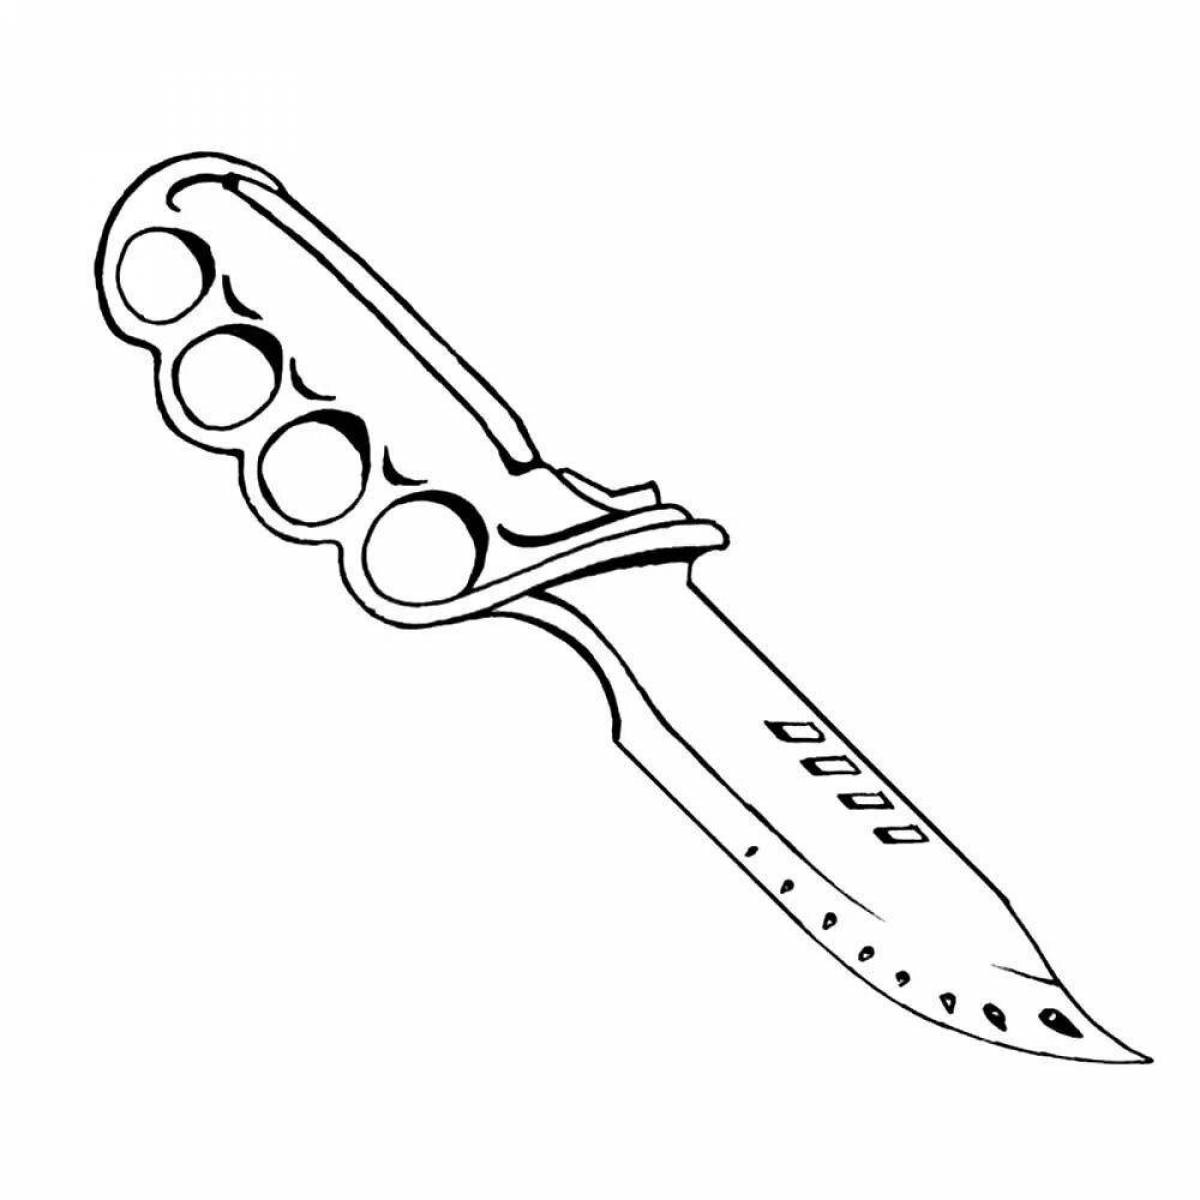 Outstanding knife coloring page for kids